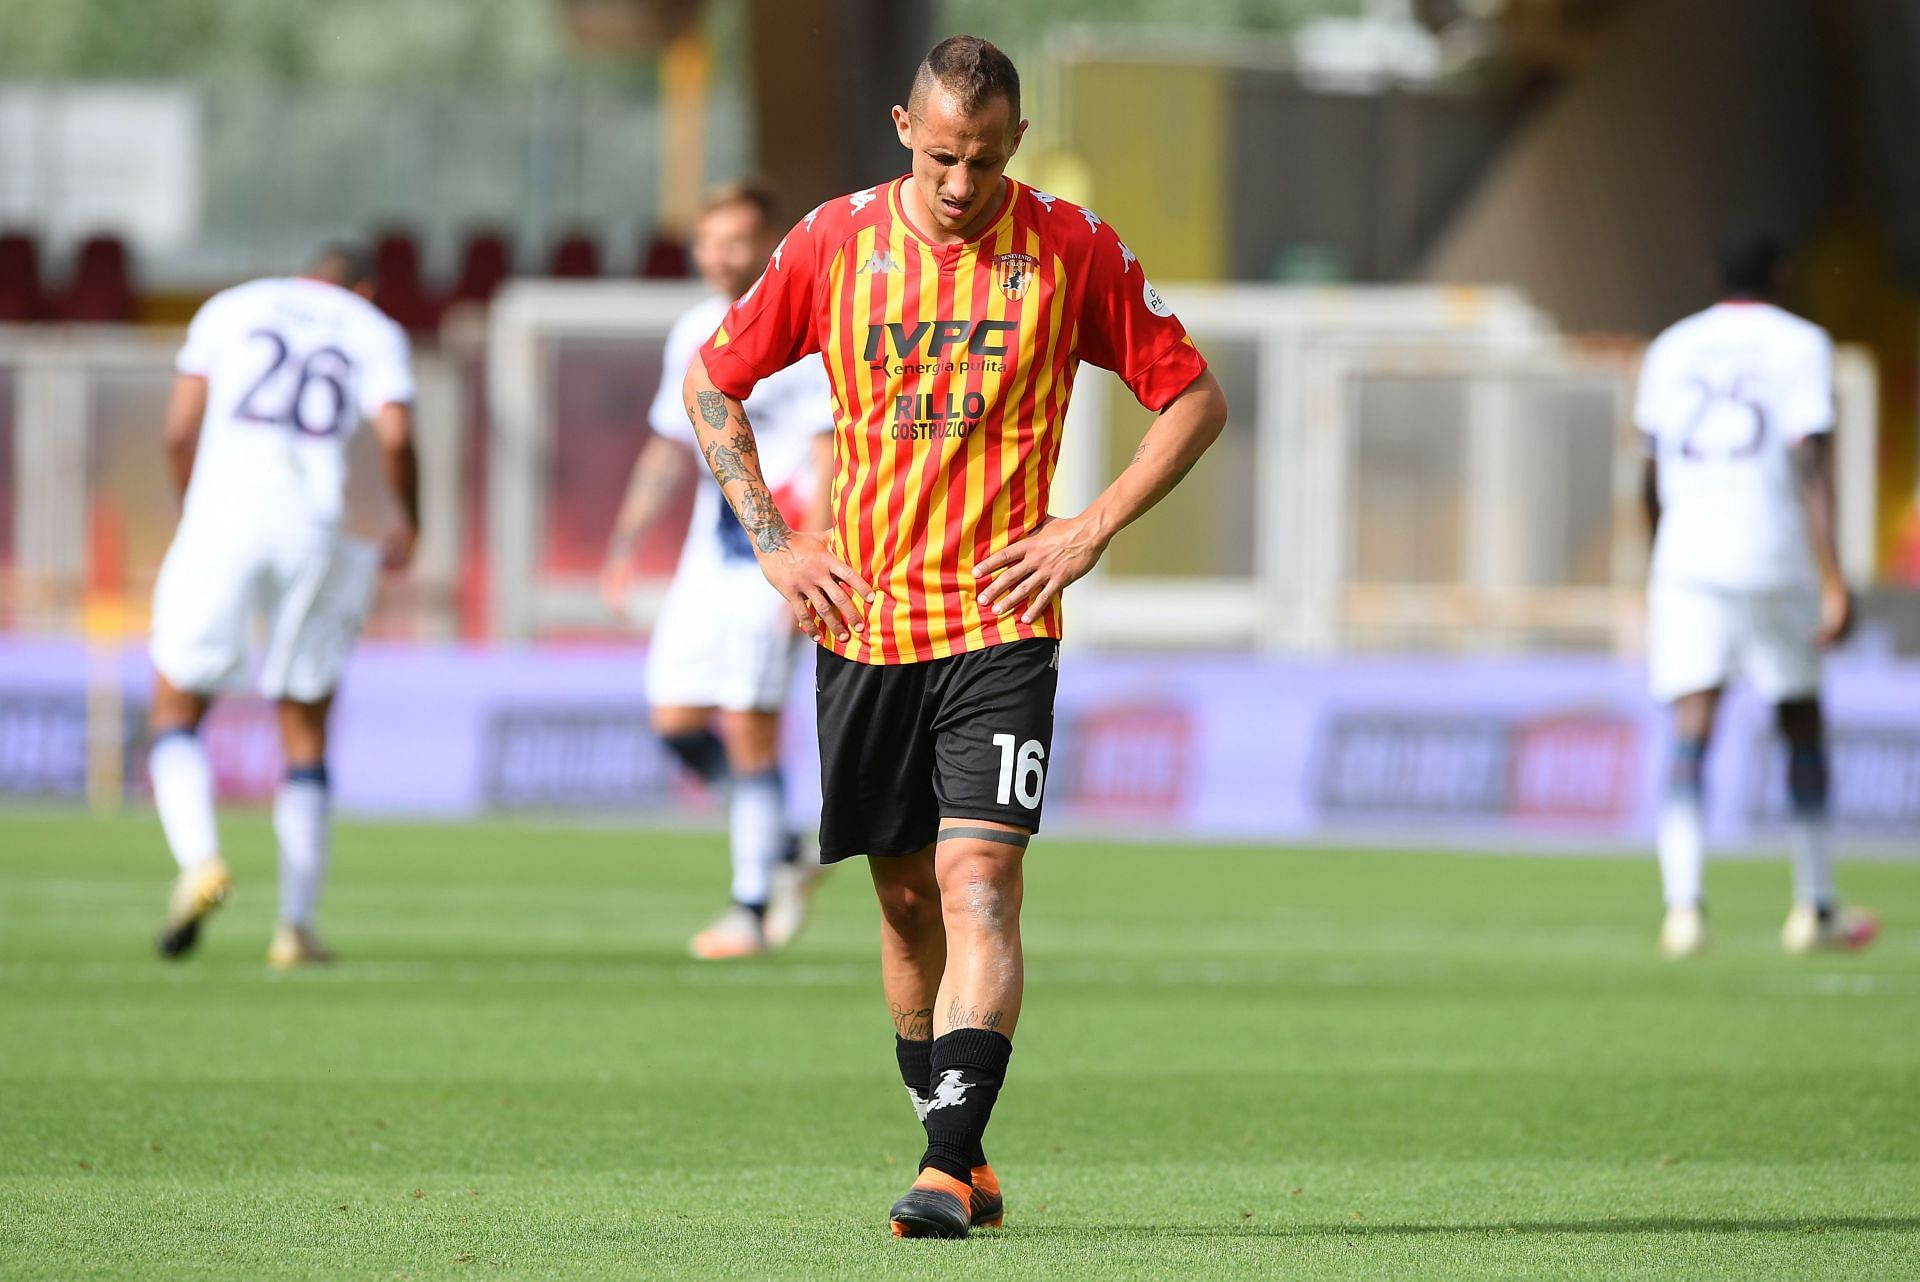 Benevento and Pisa meet in the Serie B promotion playoffs on Tuesday night